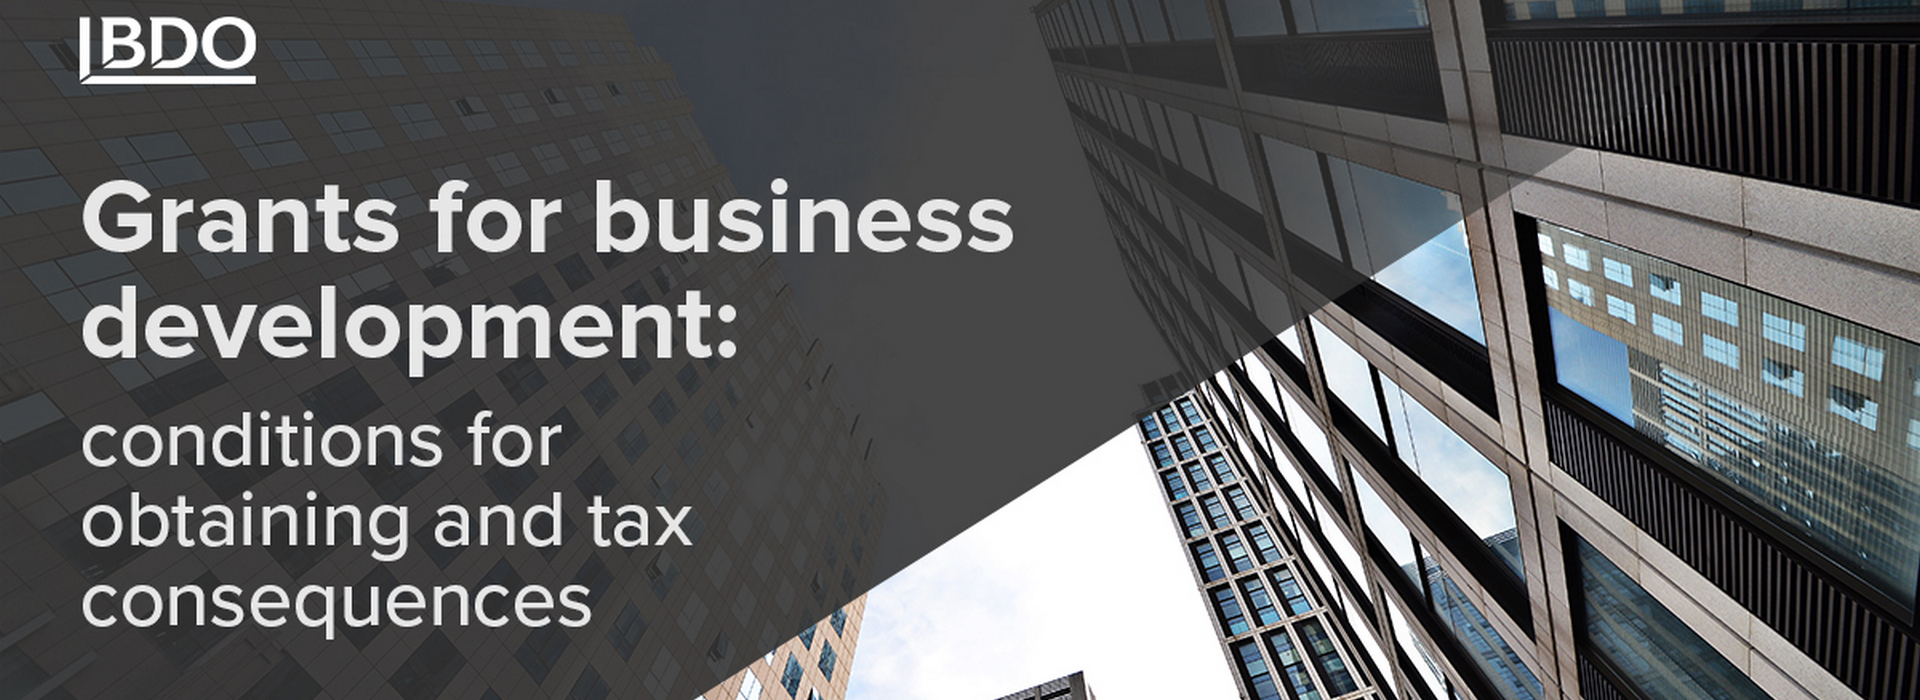 BDO in Ukraine: Your Partner in Exploring Grant Support and Tax Implications for Business Development